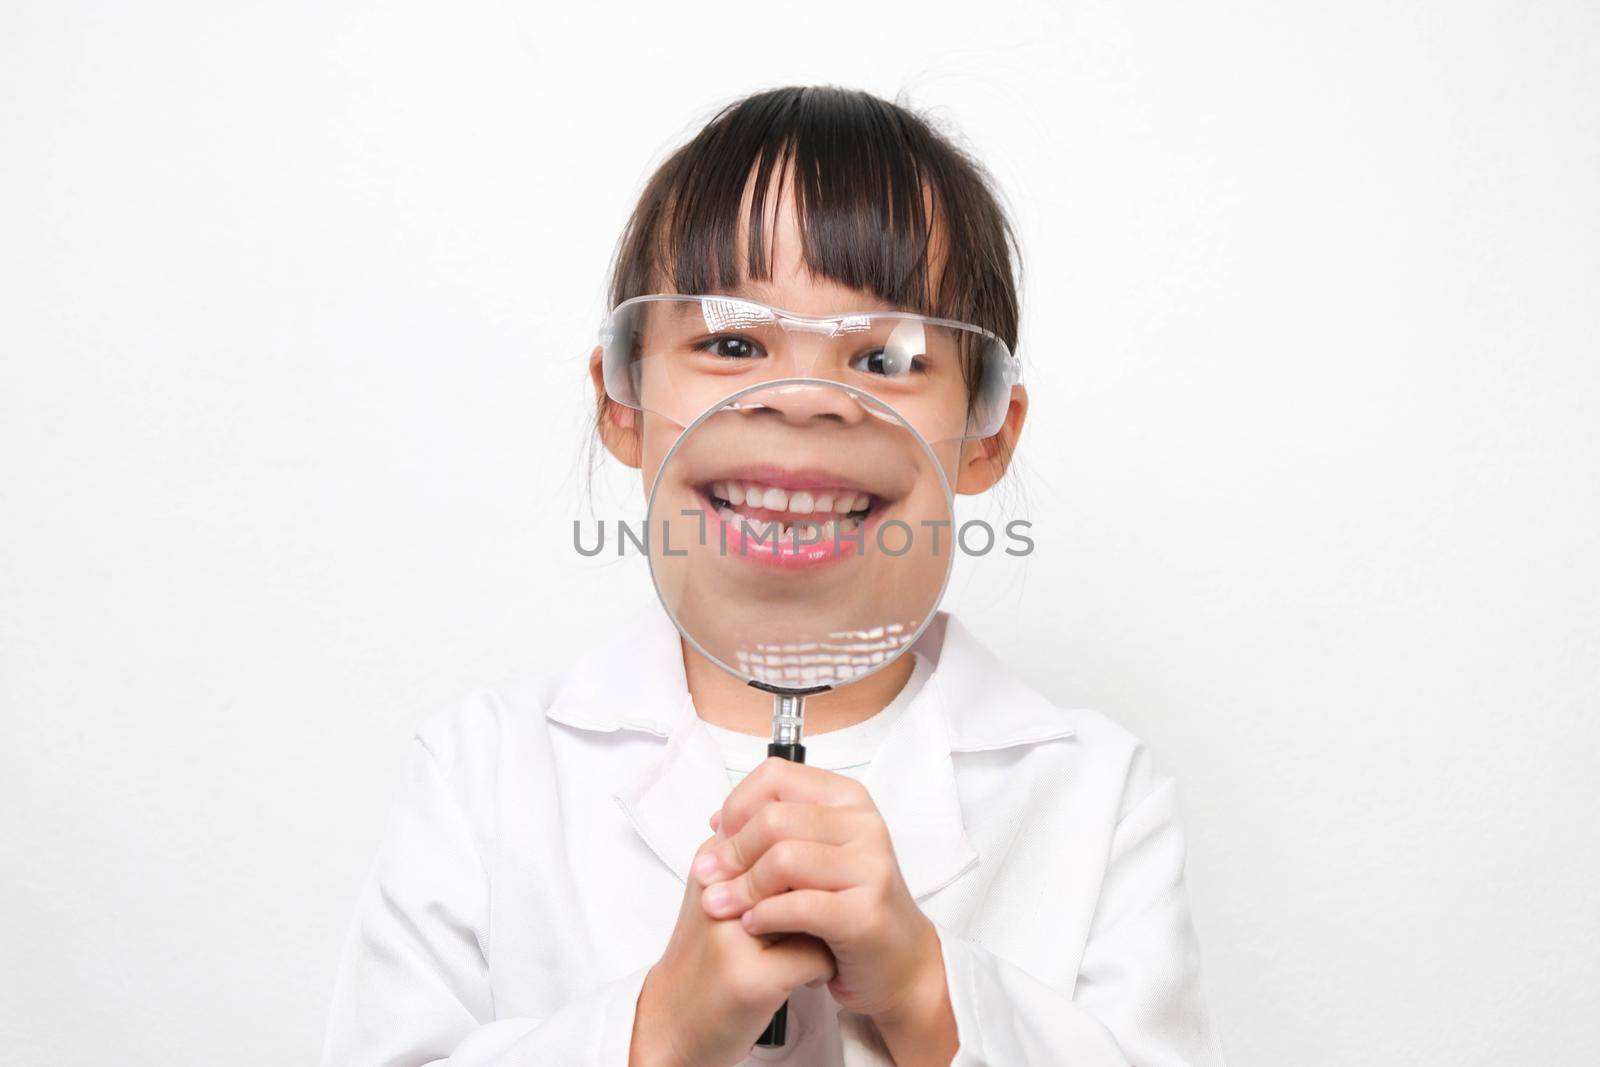 Portrait of a smiling little scientist holding a magnifying glass on a white background. A little girl role playing in a doctor or science costume. by TEERASAK